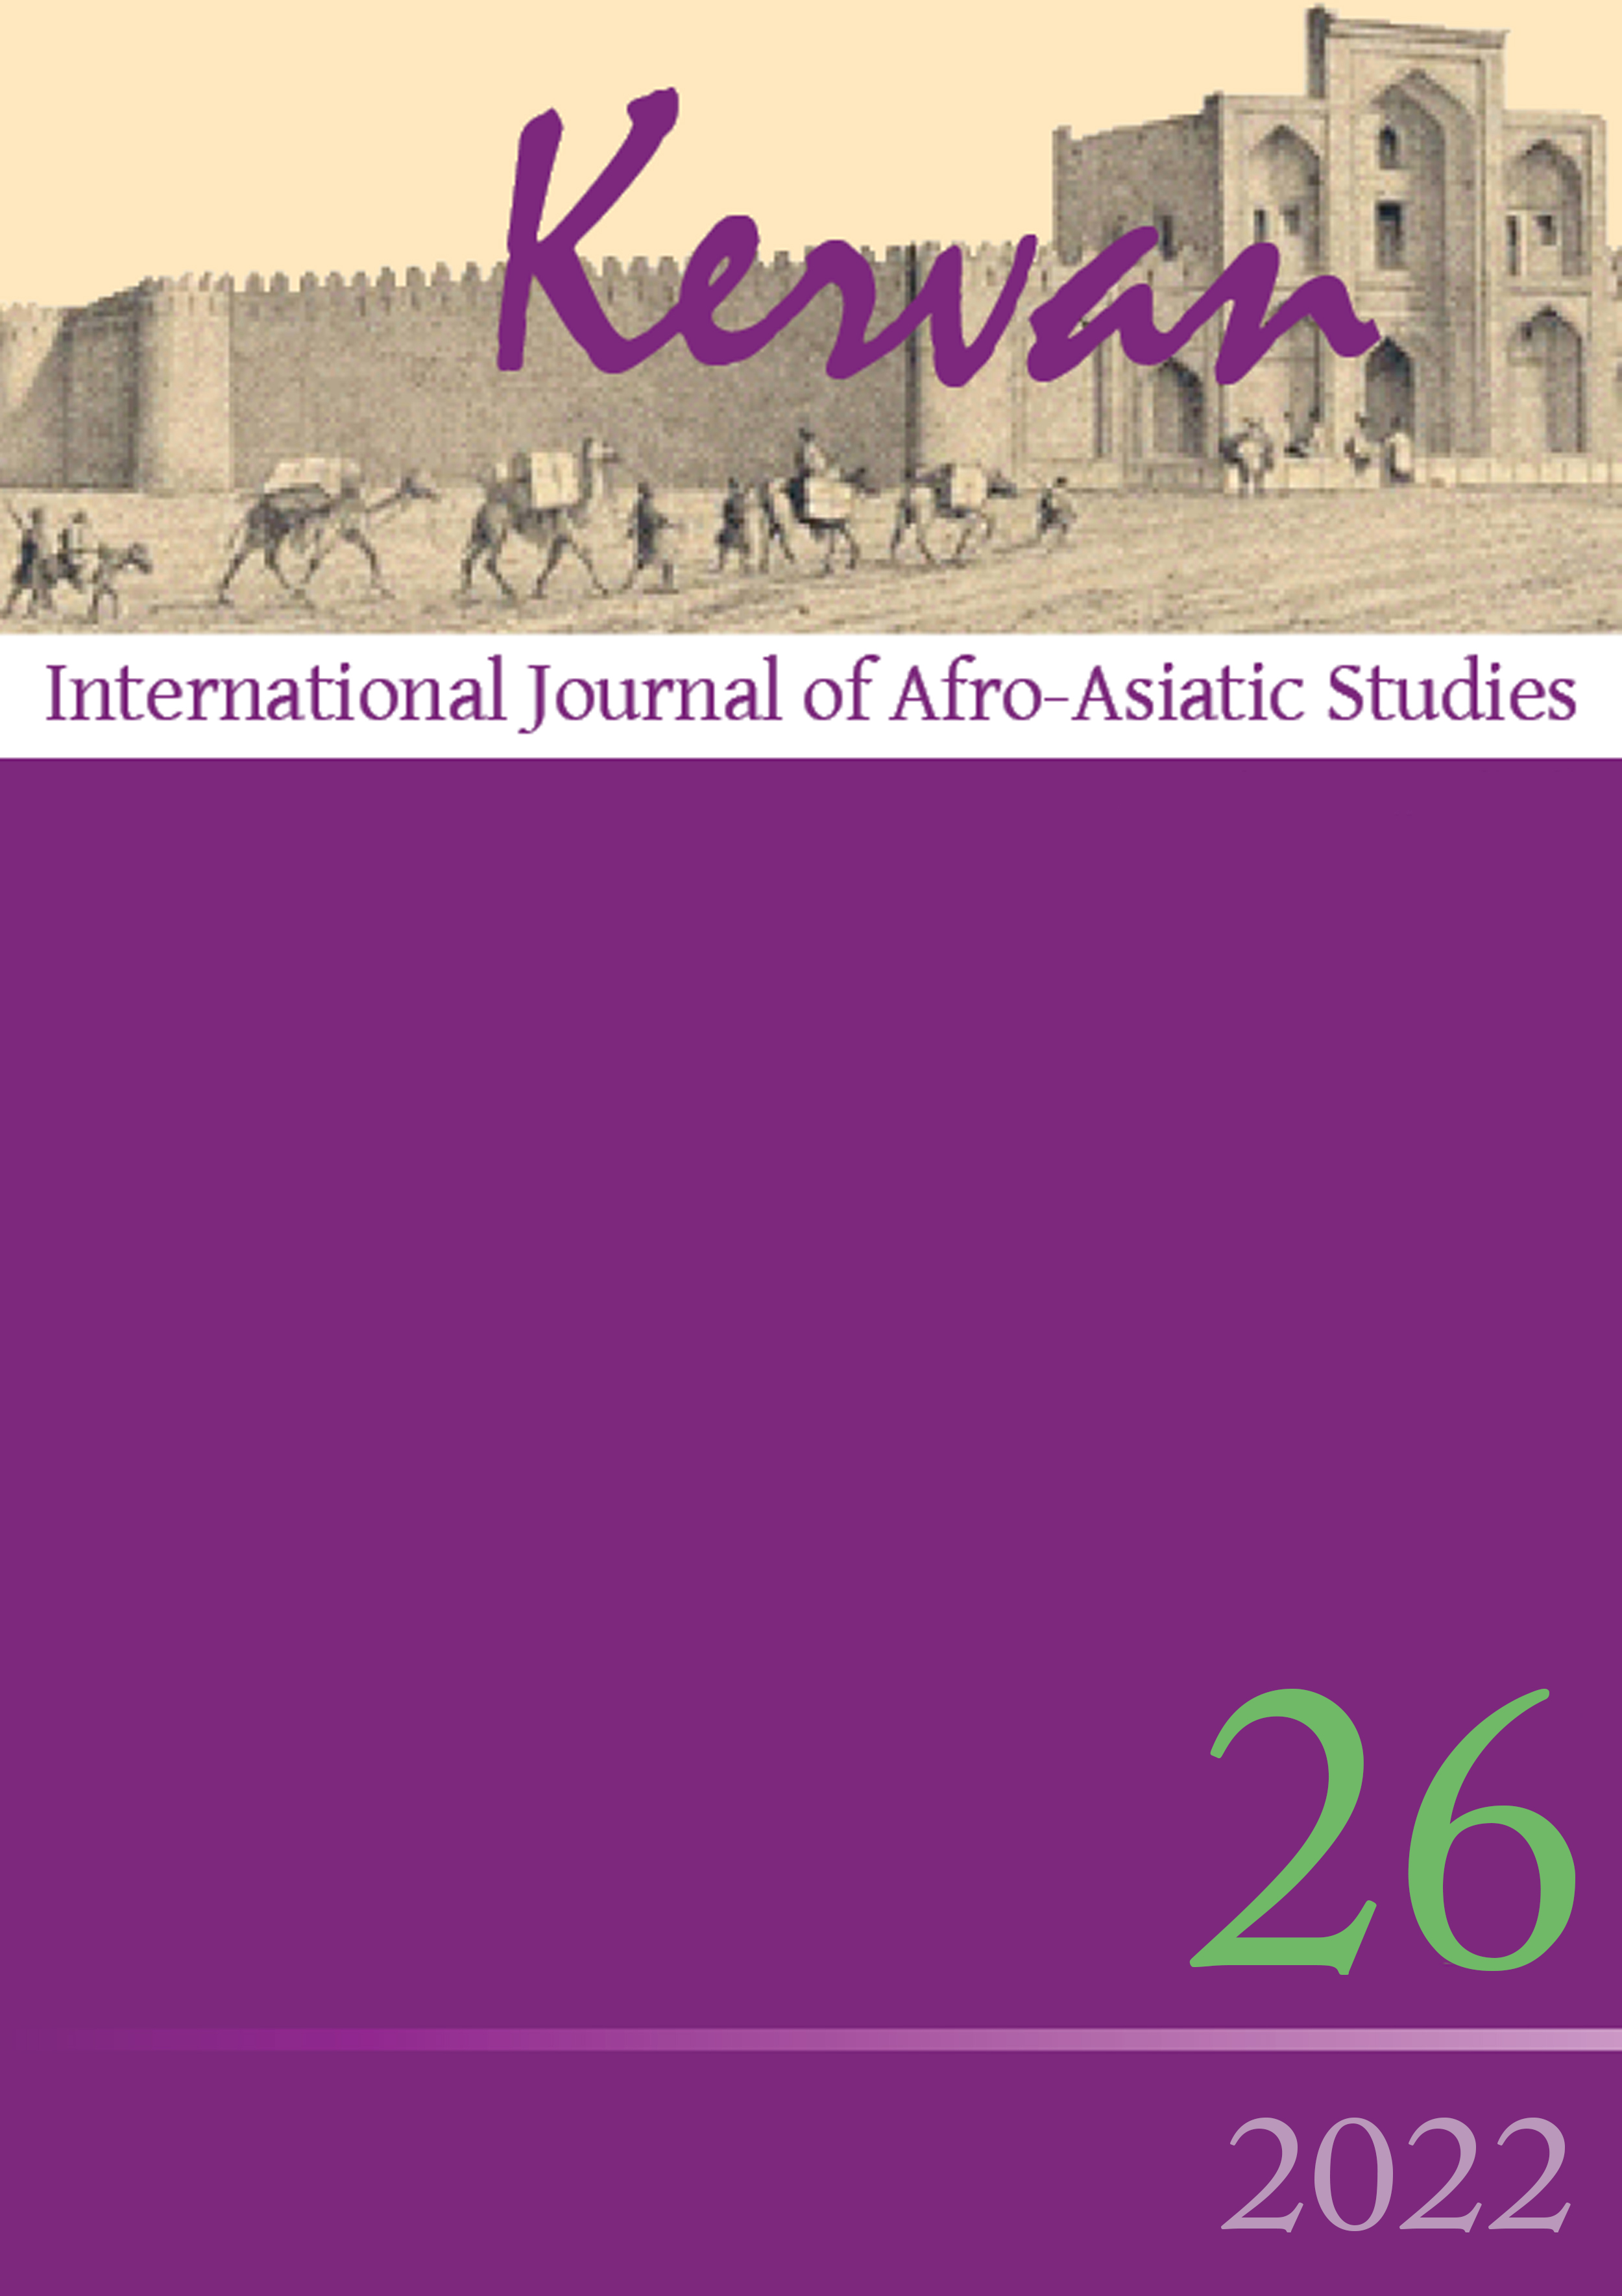 Narjes Ennasser and Rajai R. Al-Khanji, "Congruities and incongruities in Arabic literary translation: A contrastive linguistic analysis of 'The Prophet' by Khalil Gibran", Kervan–International Journal of Afro-Asiatic Studies, Vol 26, No 1 (2022), pp. 277